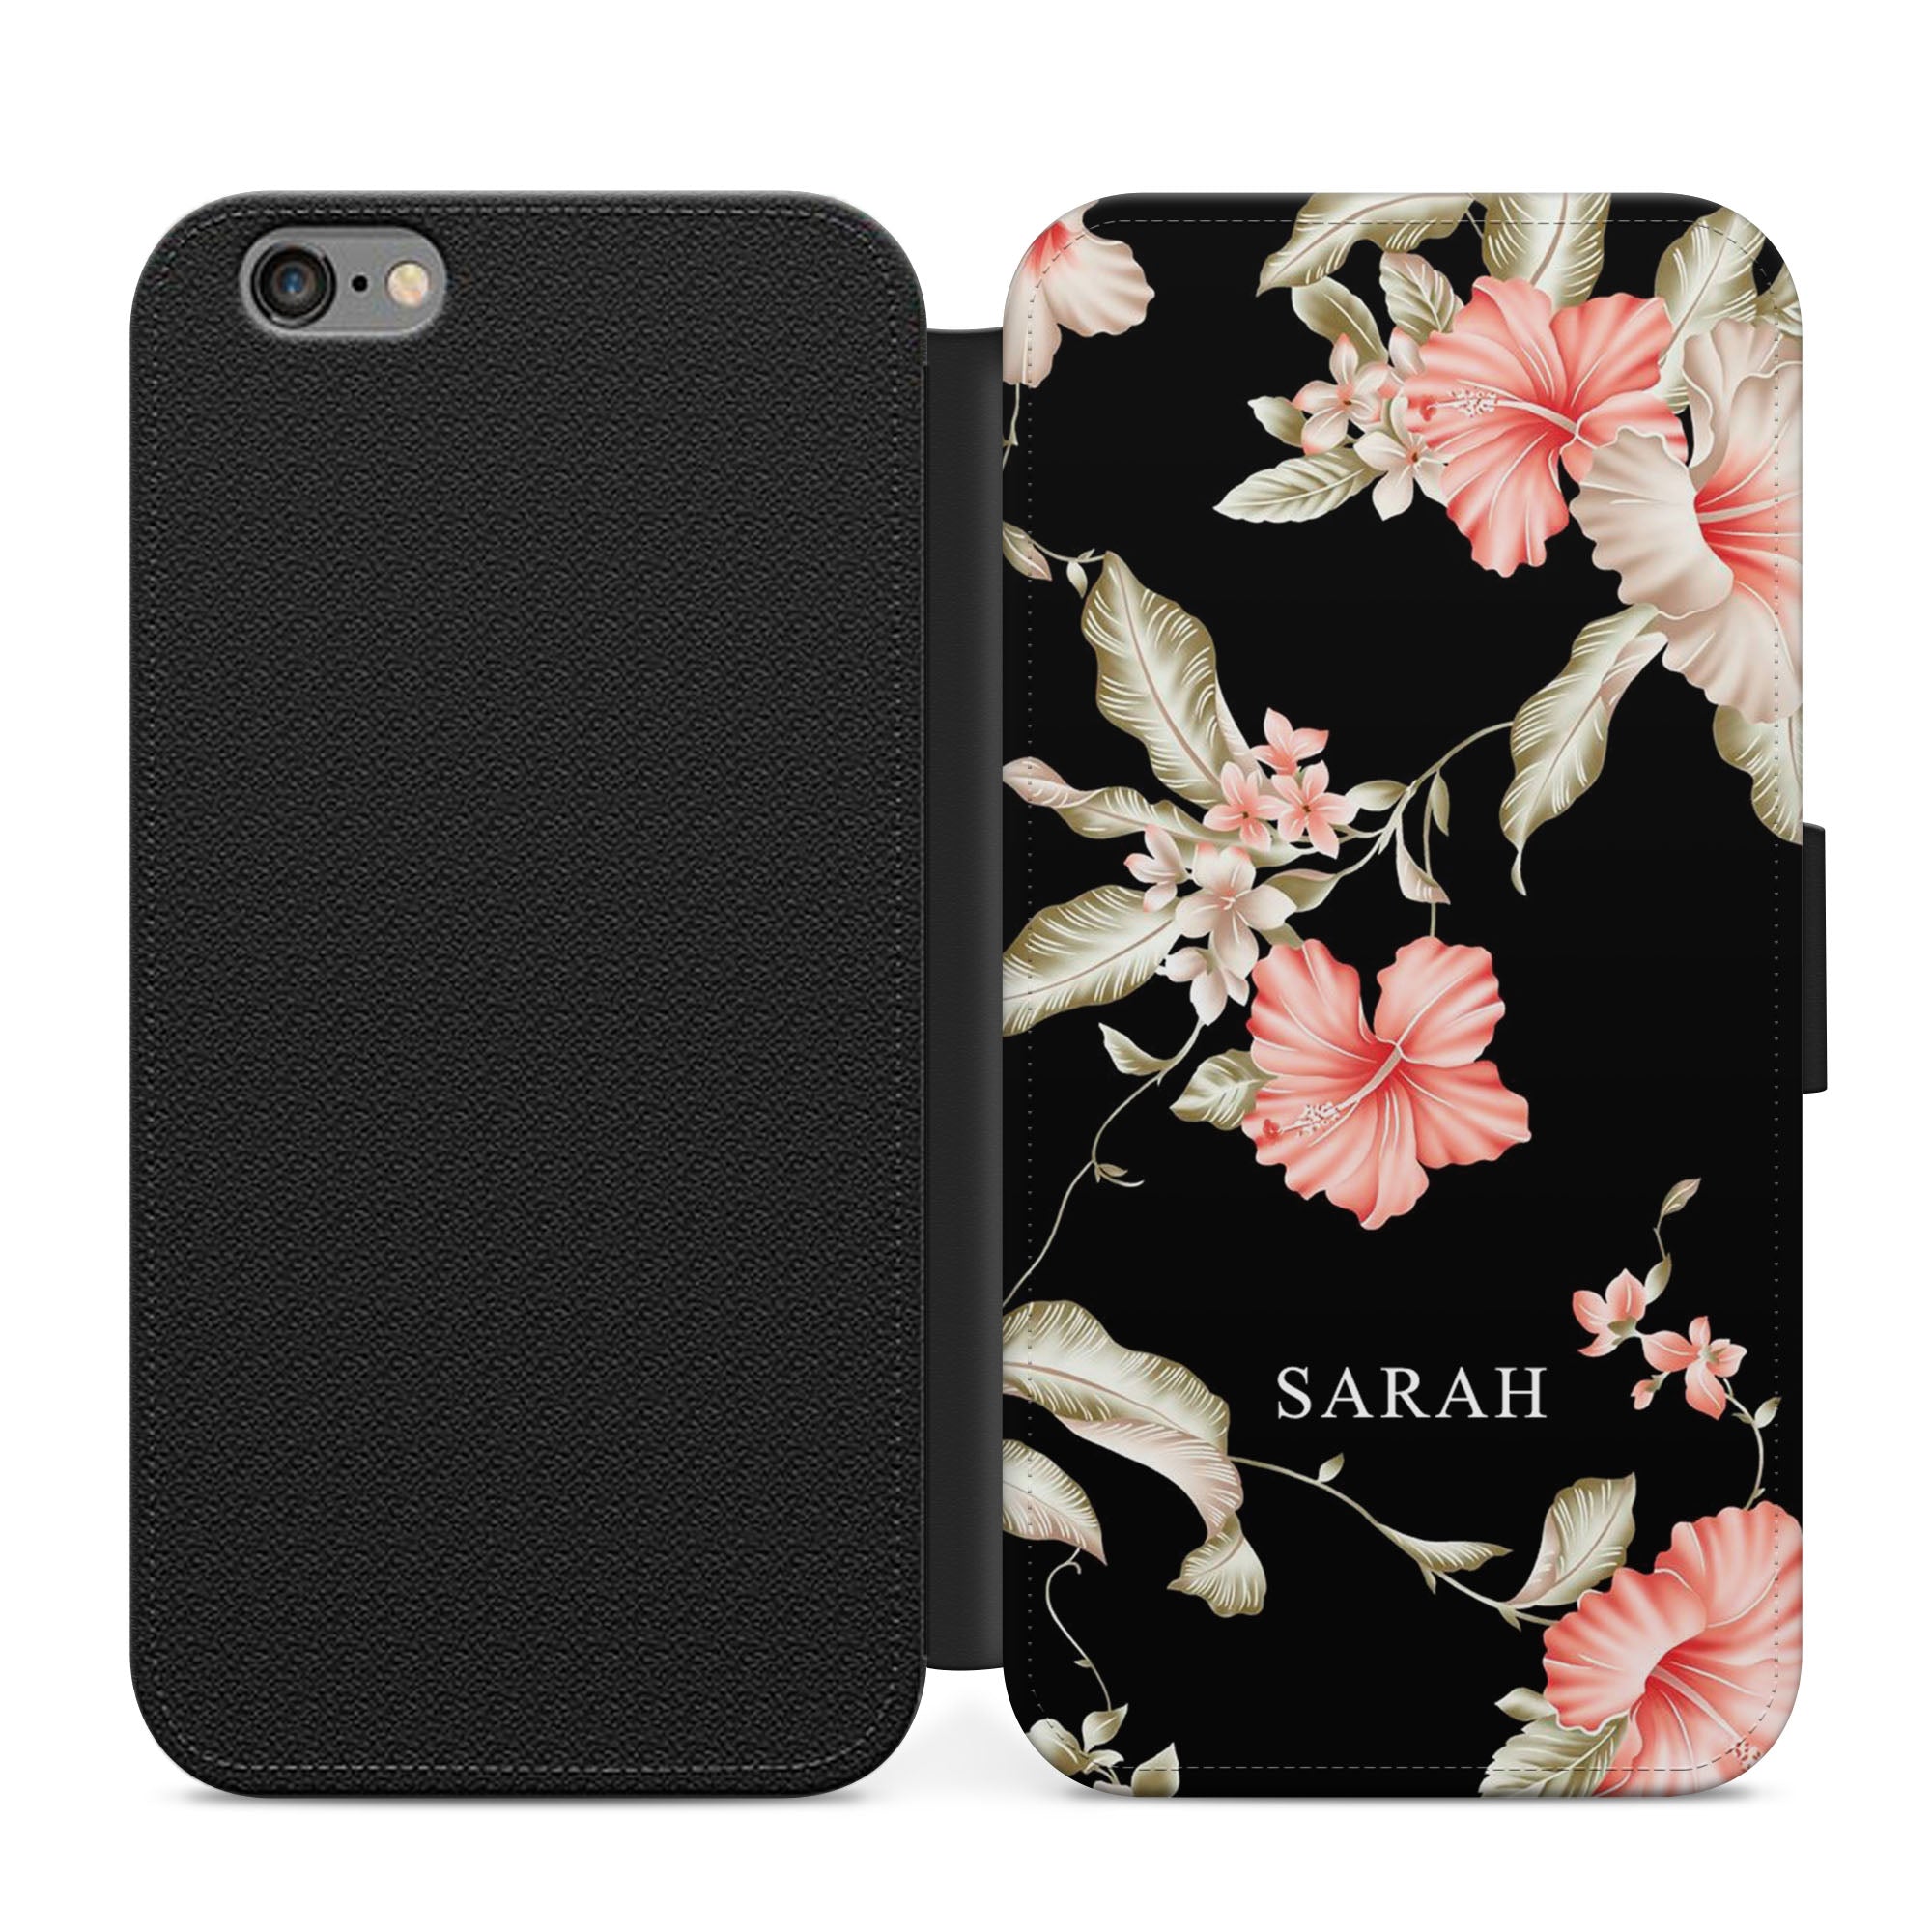 Personalised Black Floral Faux Leather Flip Case Wallet for iPhone / Samsung